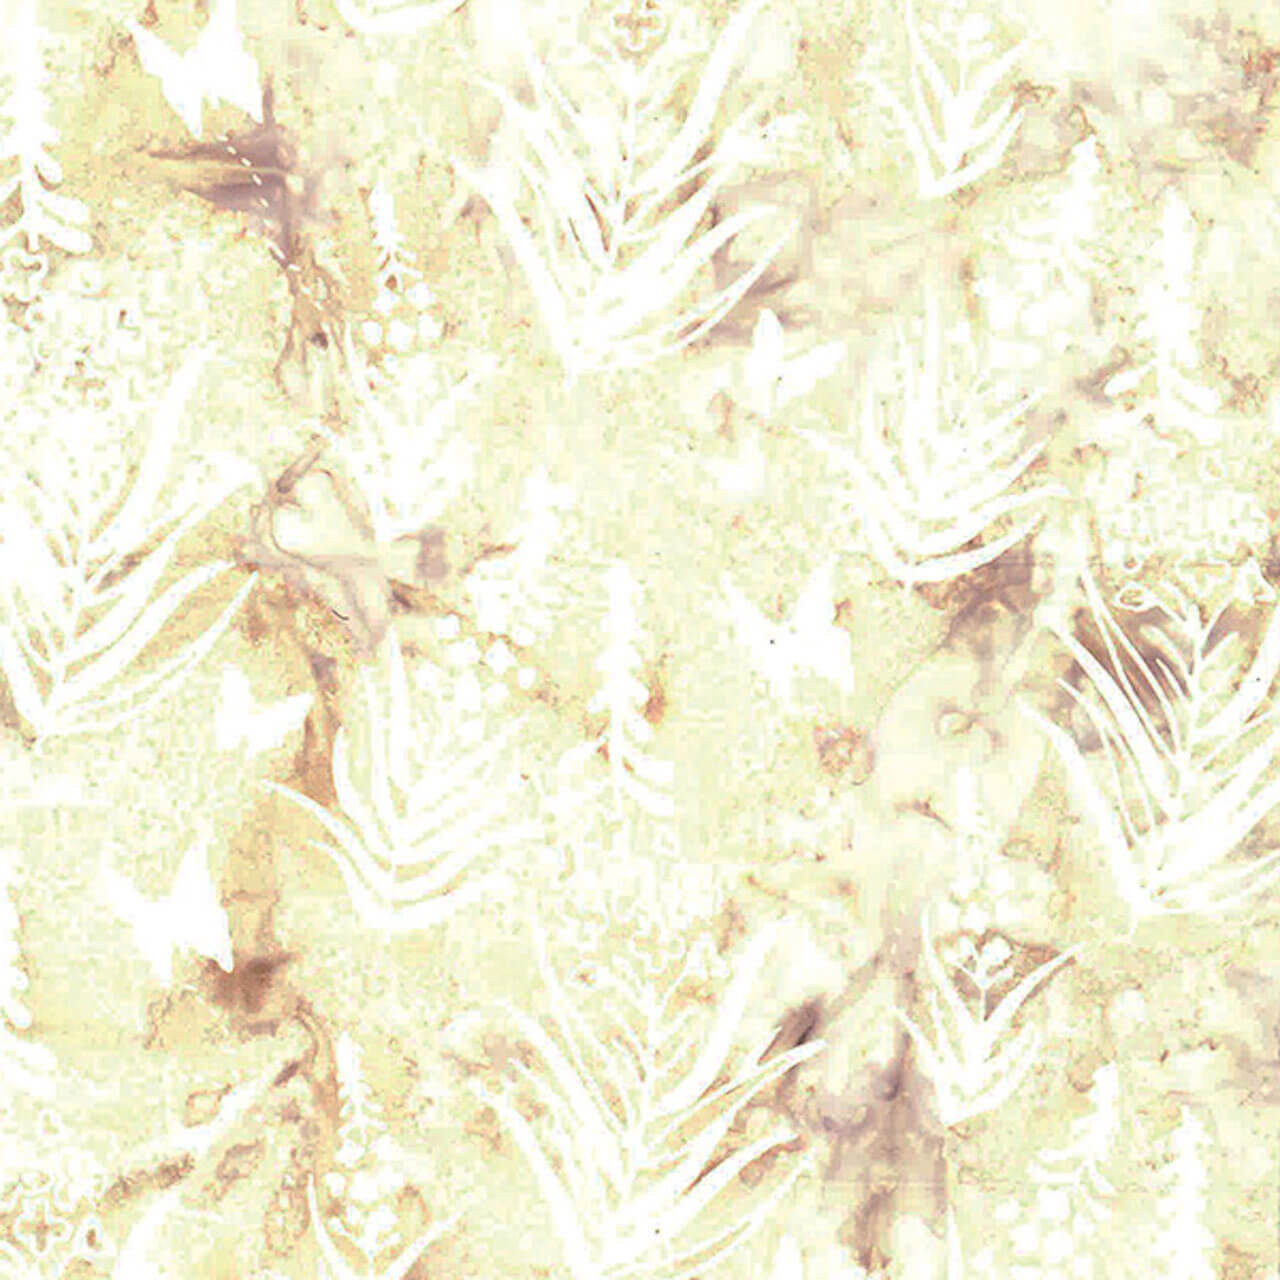 A detailed view of Hoffman Fabrics' Fossil Flora batik fabric, featuring yellow botanical patterns with a crackle effect on cotton.